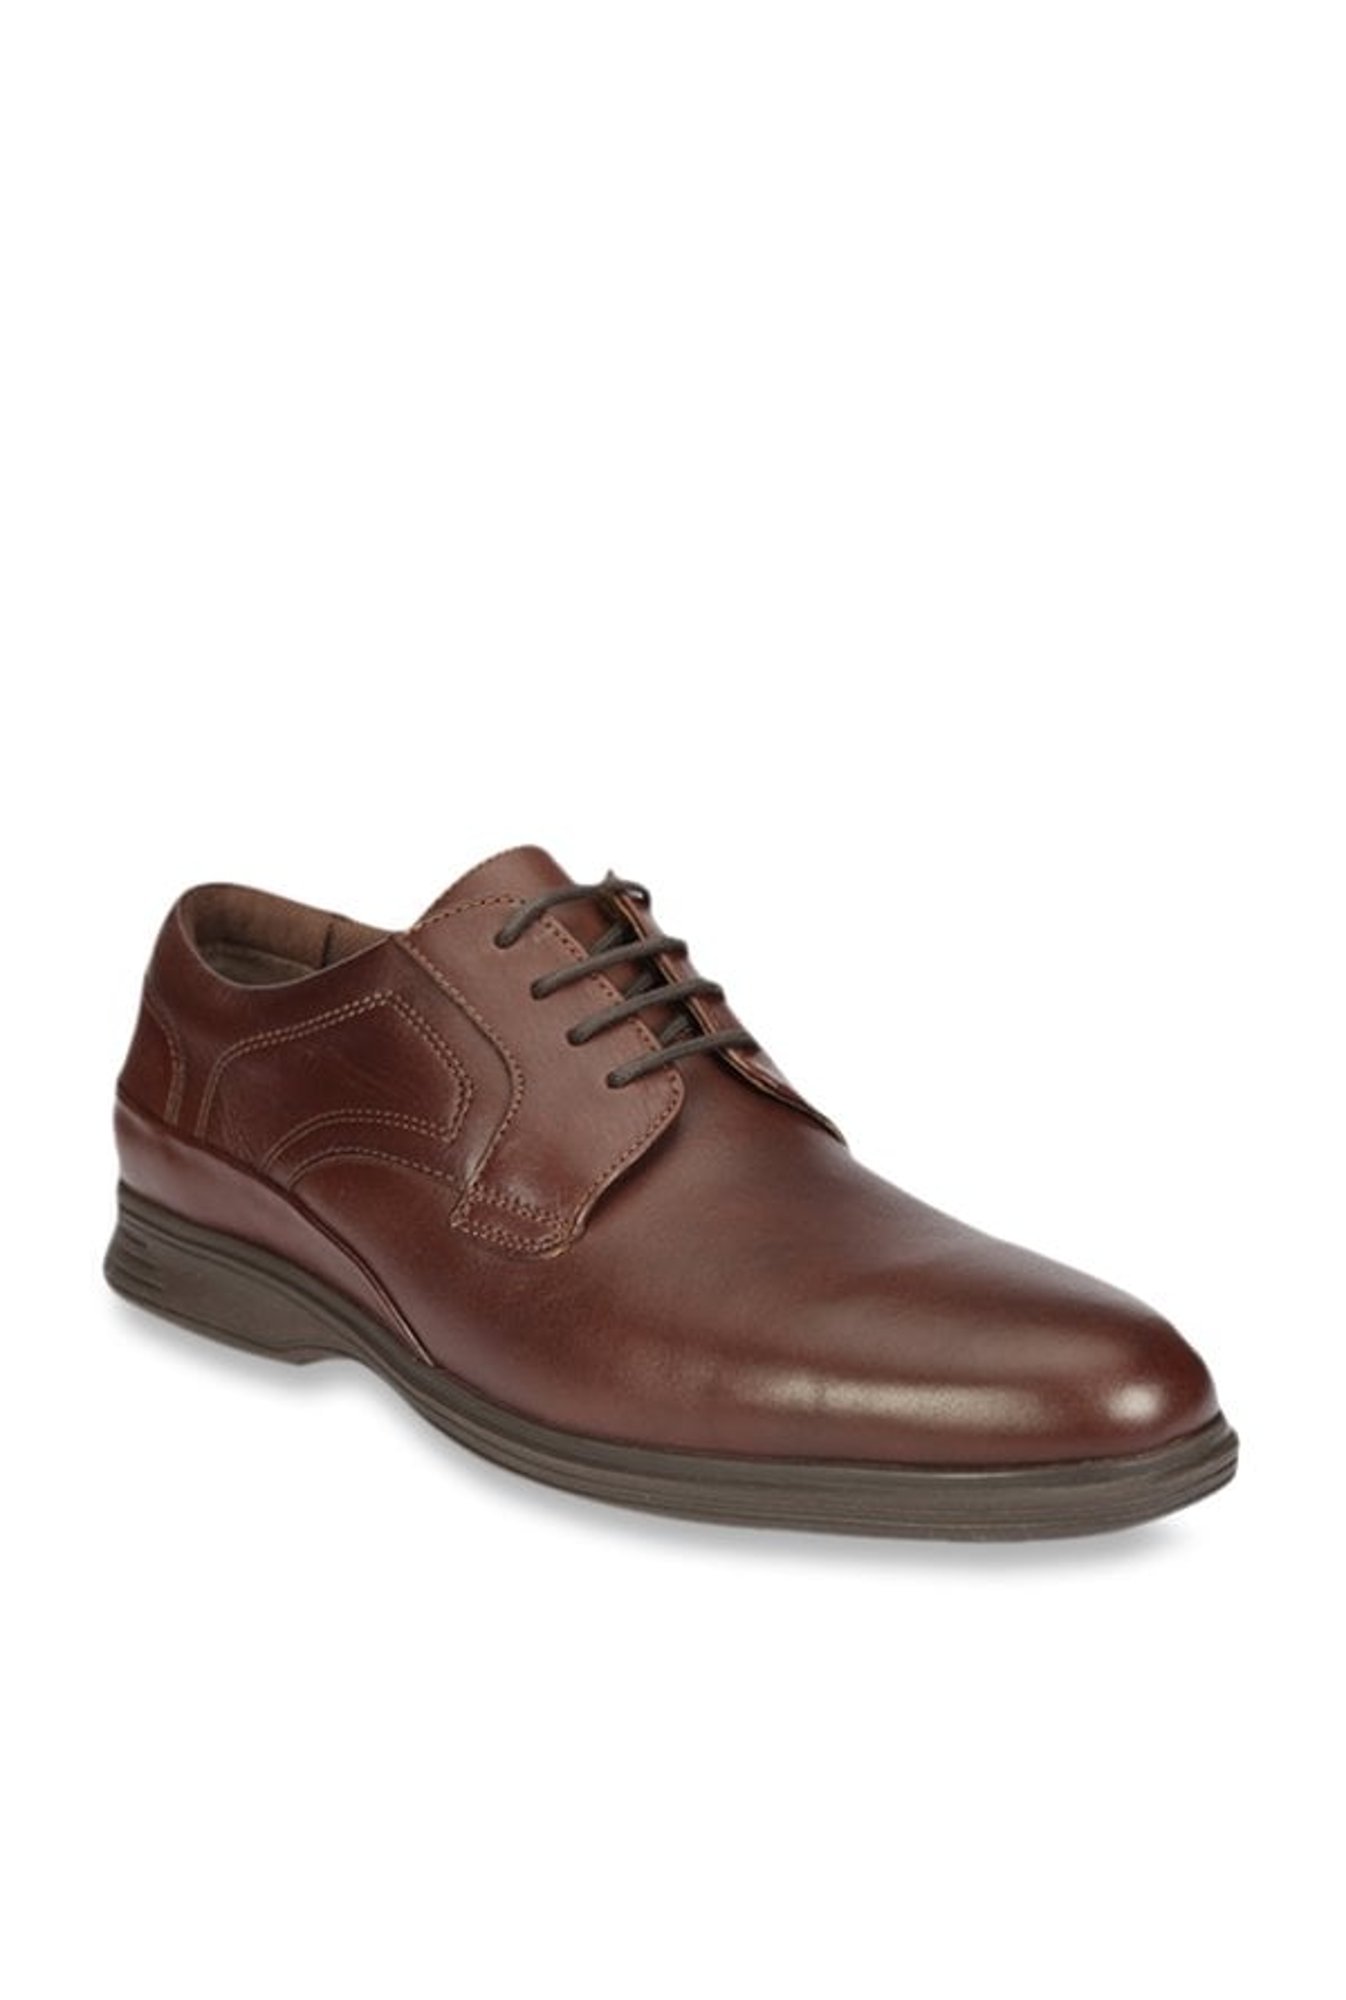 Ruosh California Brown Derby Shoes from 